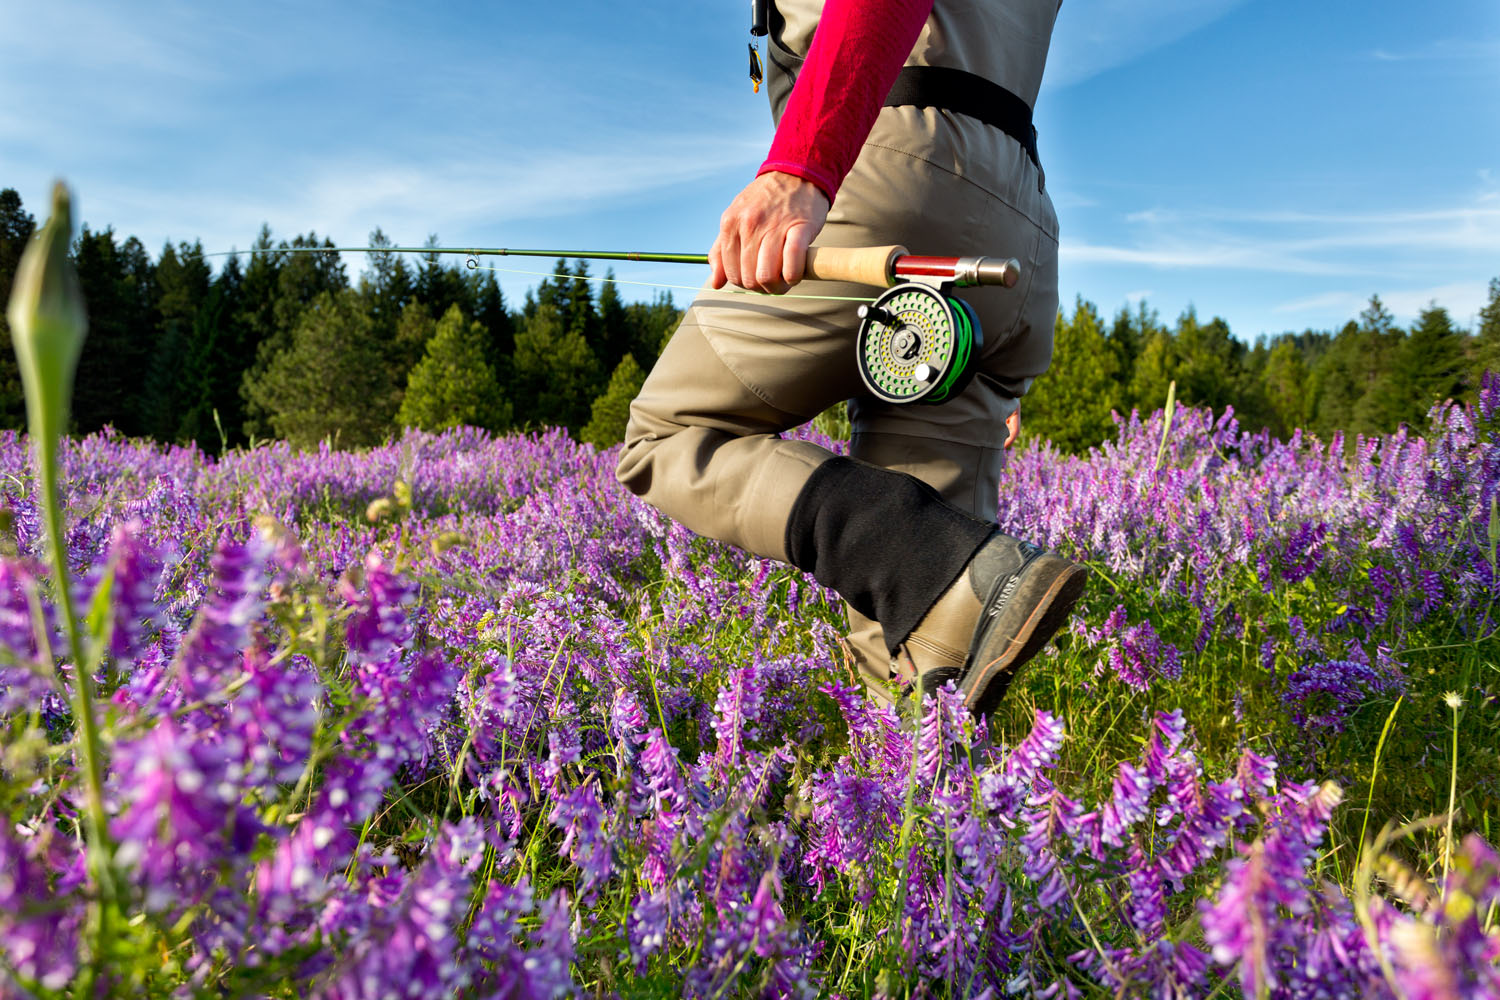  Lifestyle: Kathleen Hasenoehrl walking through a field of wildflowers on her way to fly fish the Yakima River at sunset, Central Cascades, Washington 